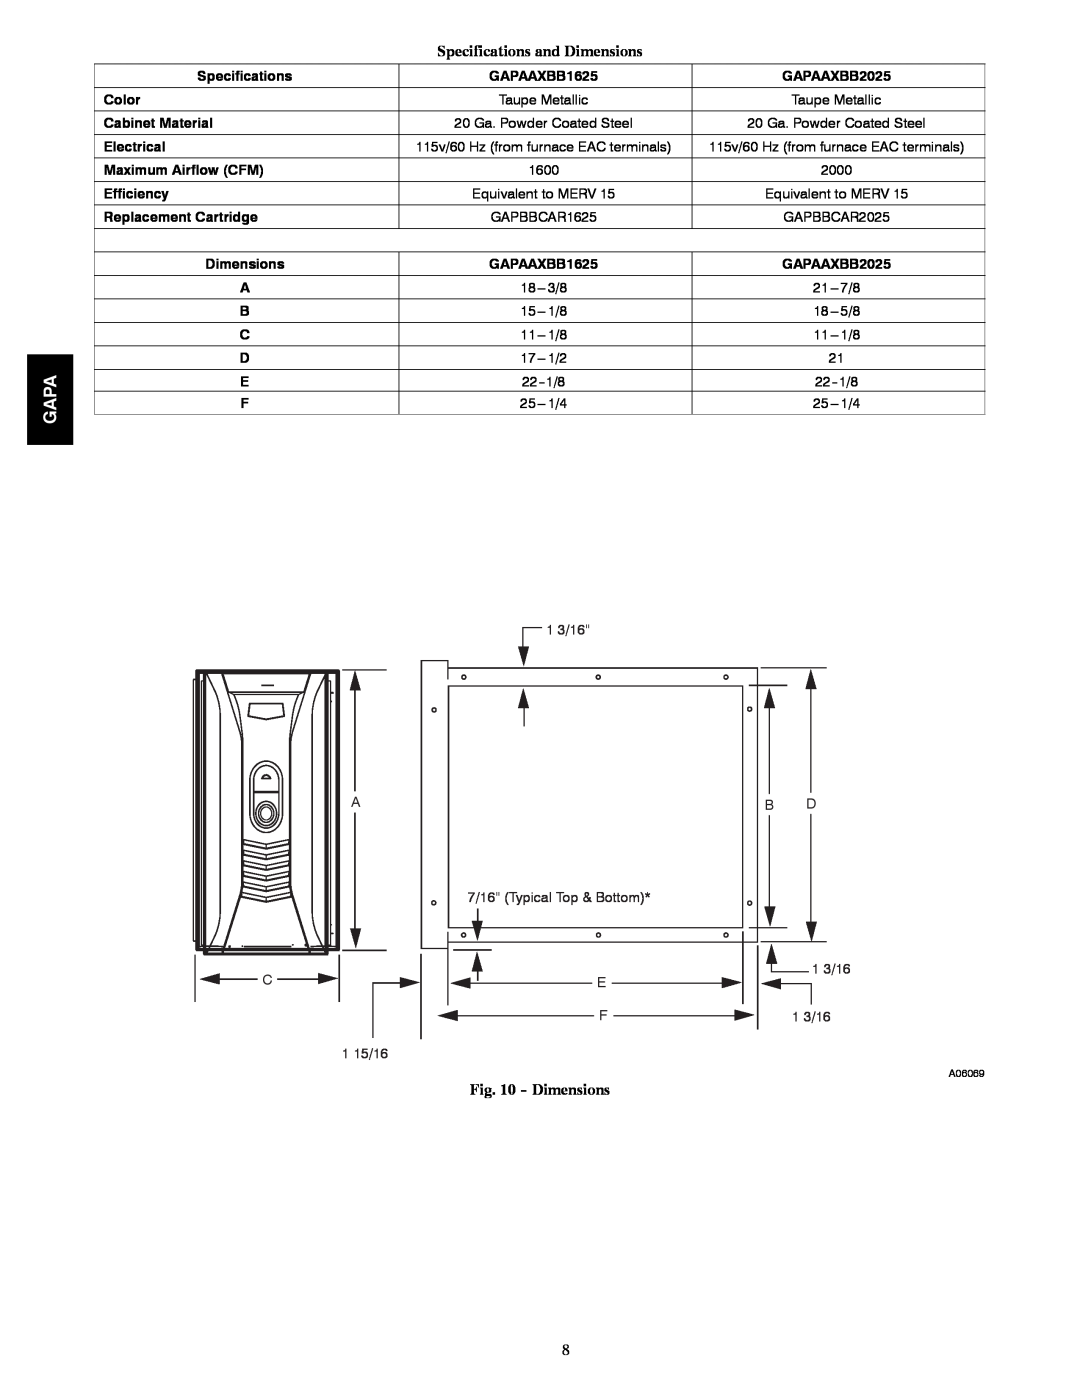 Bryant AIRT PURIFIER Specifications and Dimensions, Gapa, A 7/16 Typical Top & Bottom E F 1 15/16, 1 3/16 1 3/16 